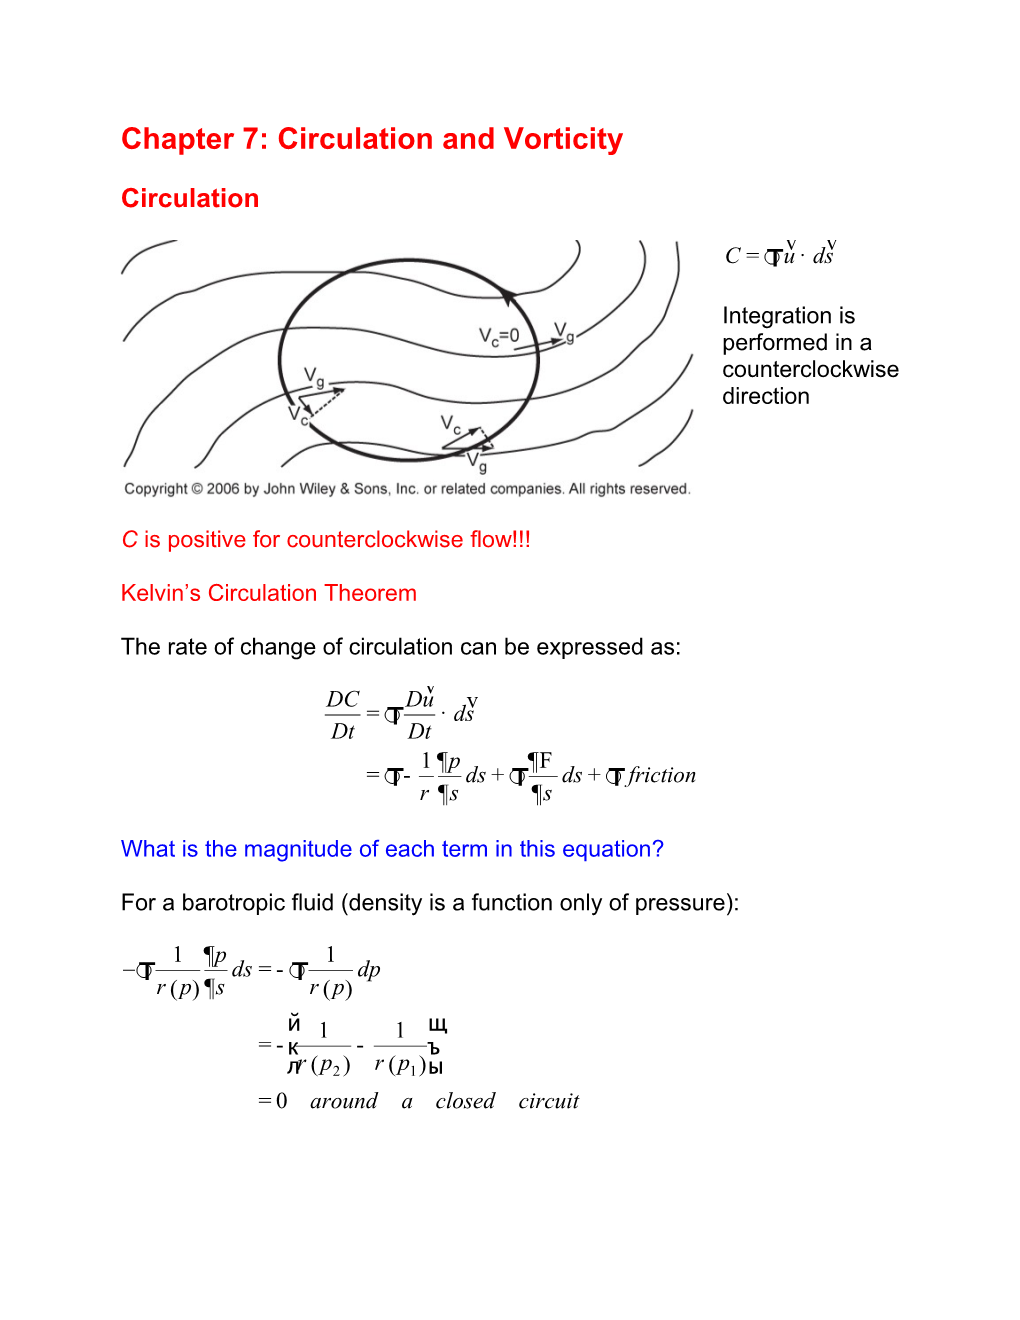 Chapter 7: Circulation and Vorticity